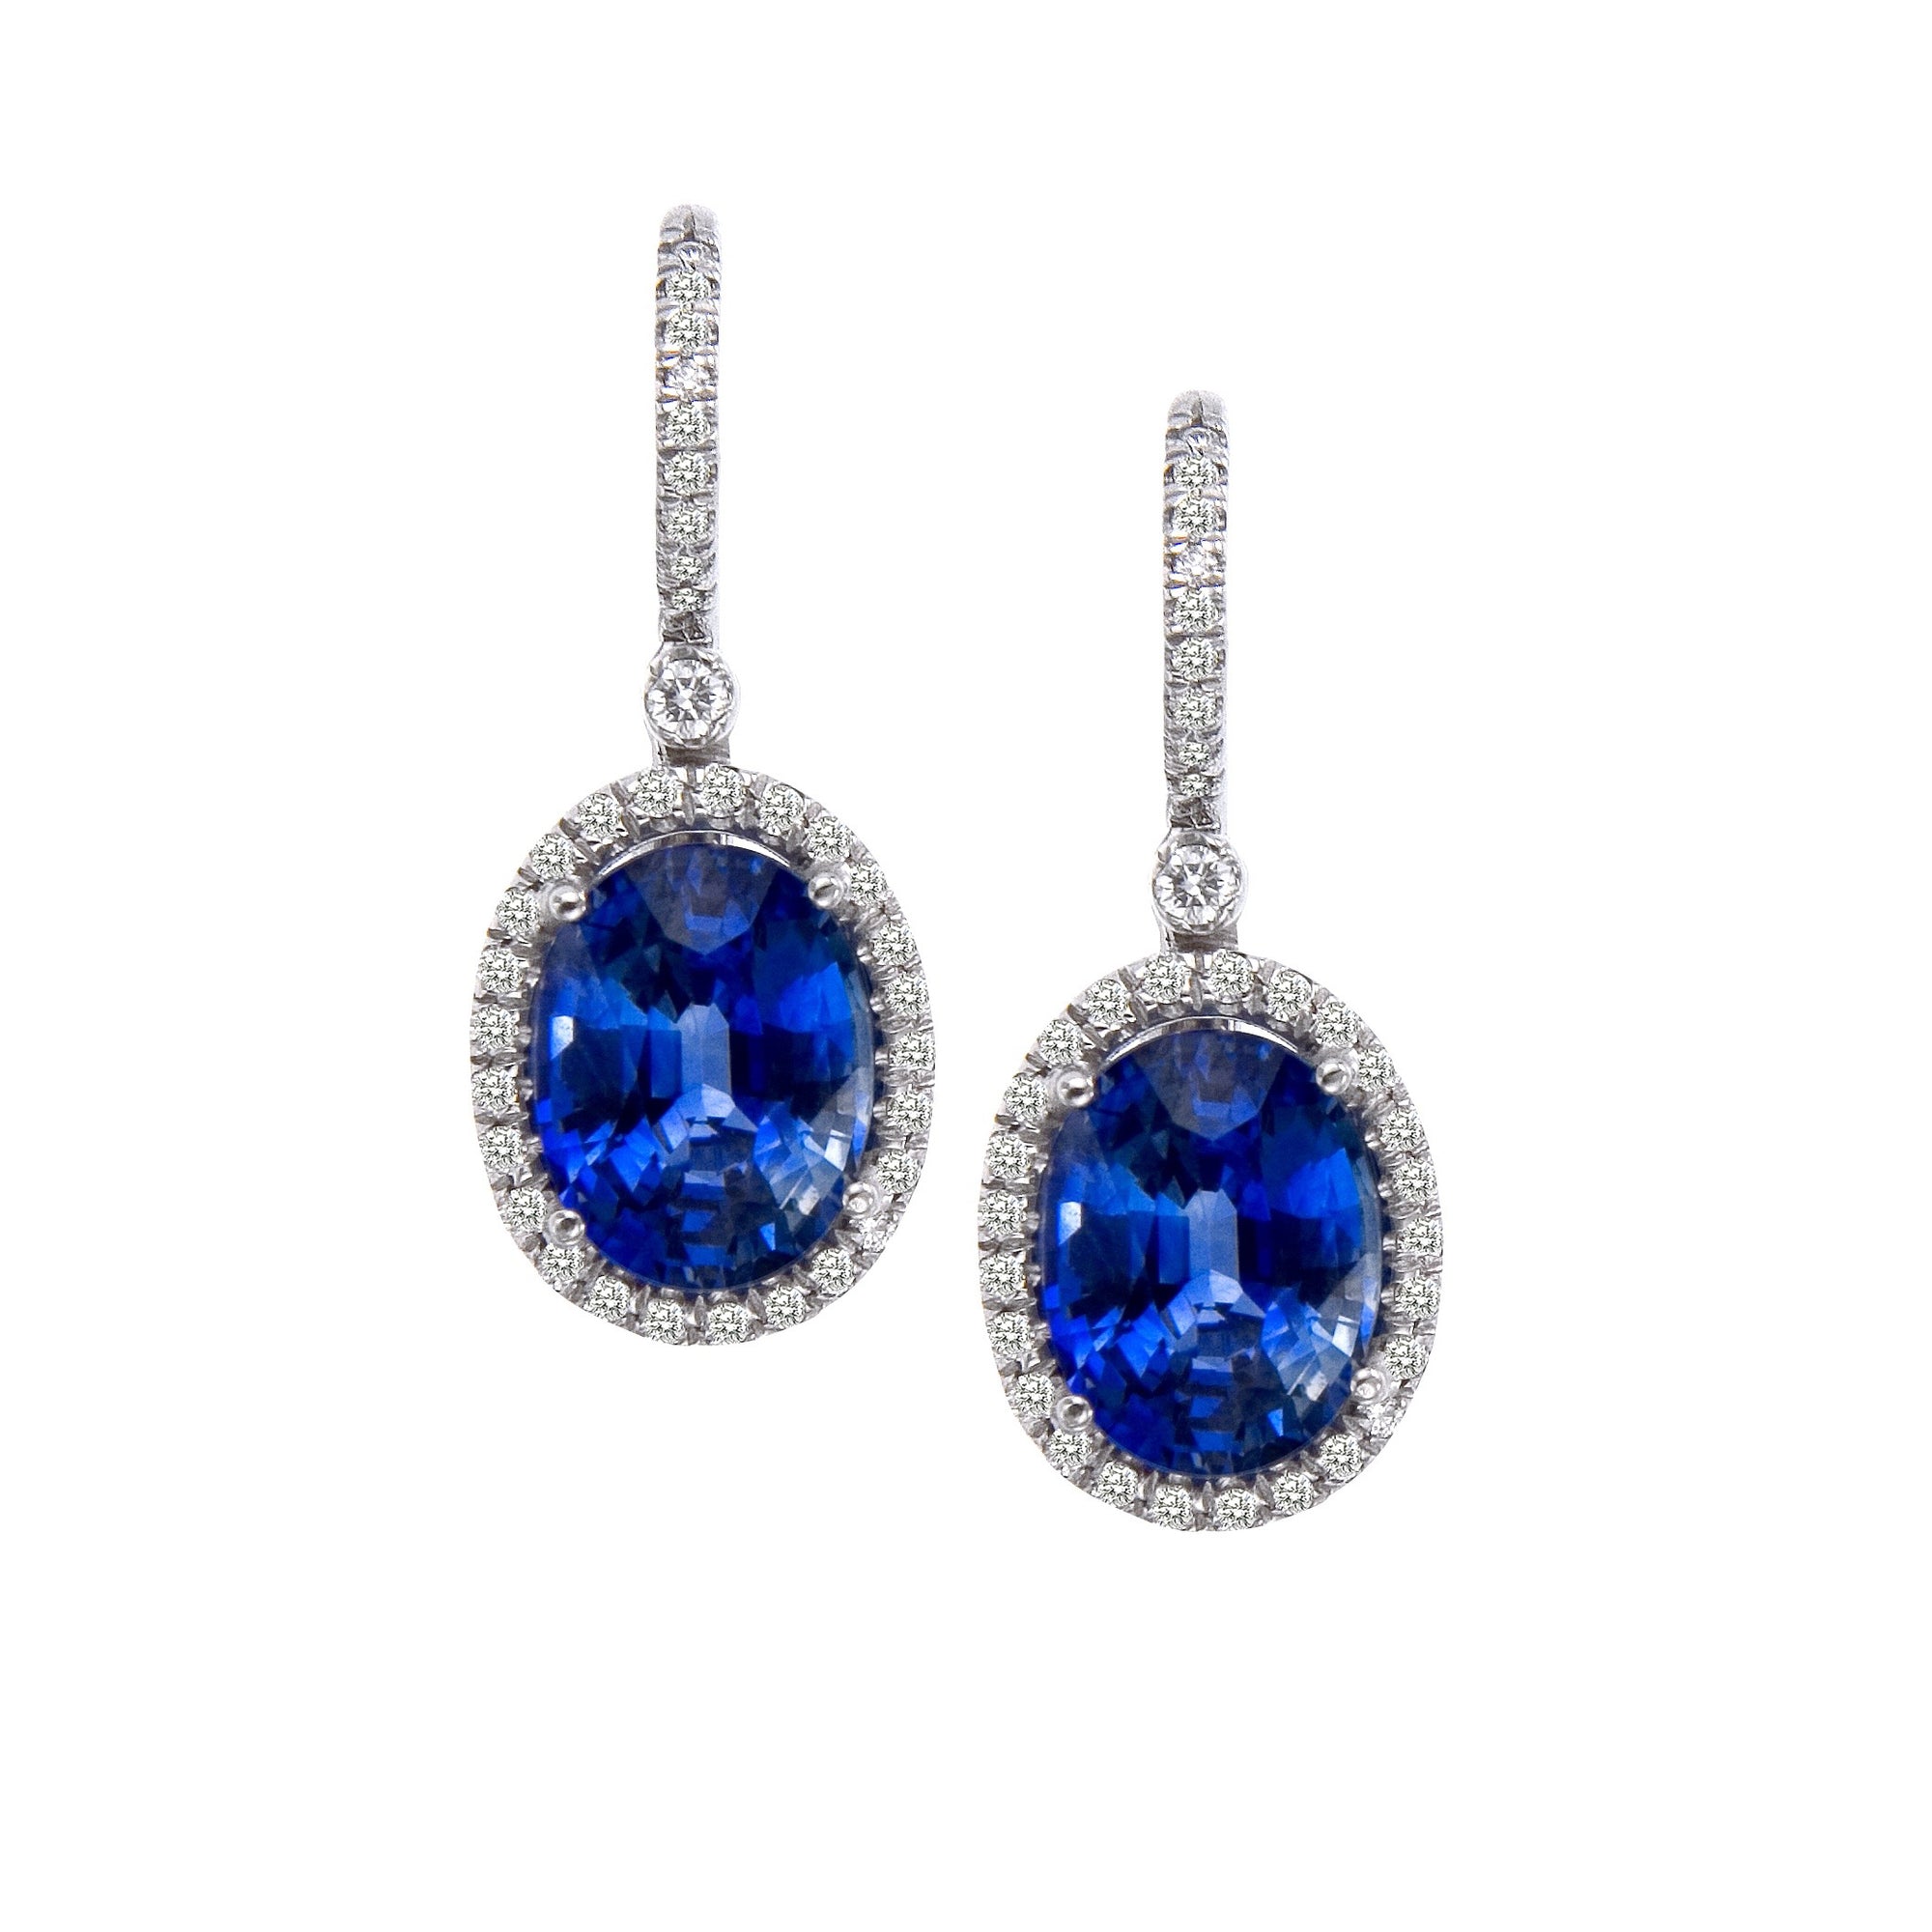 18K white gold sapphire and diamond earrings featuring 2 oval sapphires, and round brilliant diamonds set in a drop earring design. 